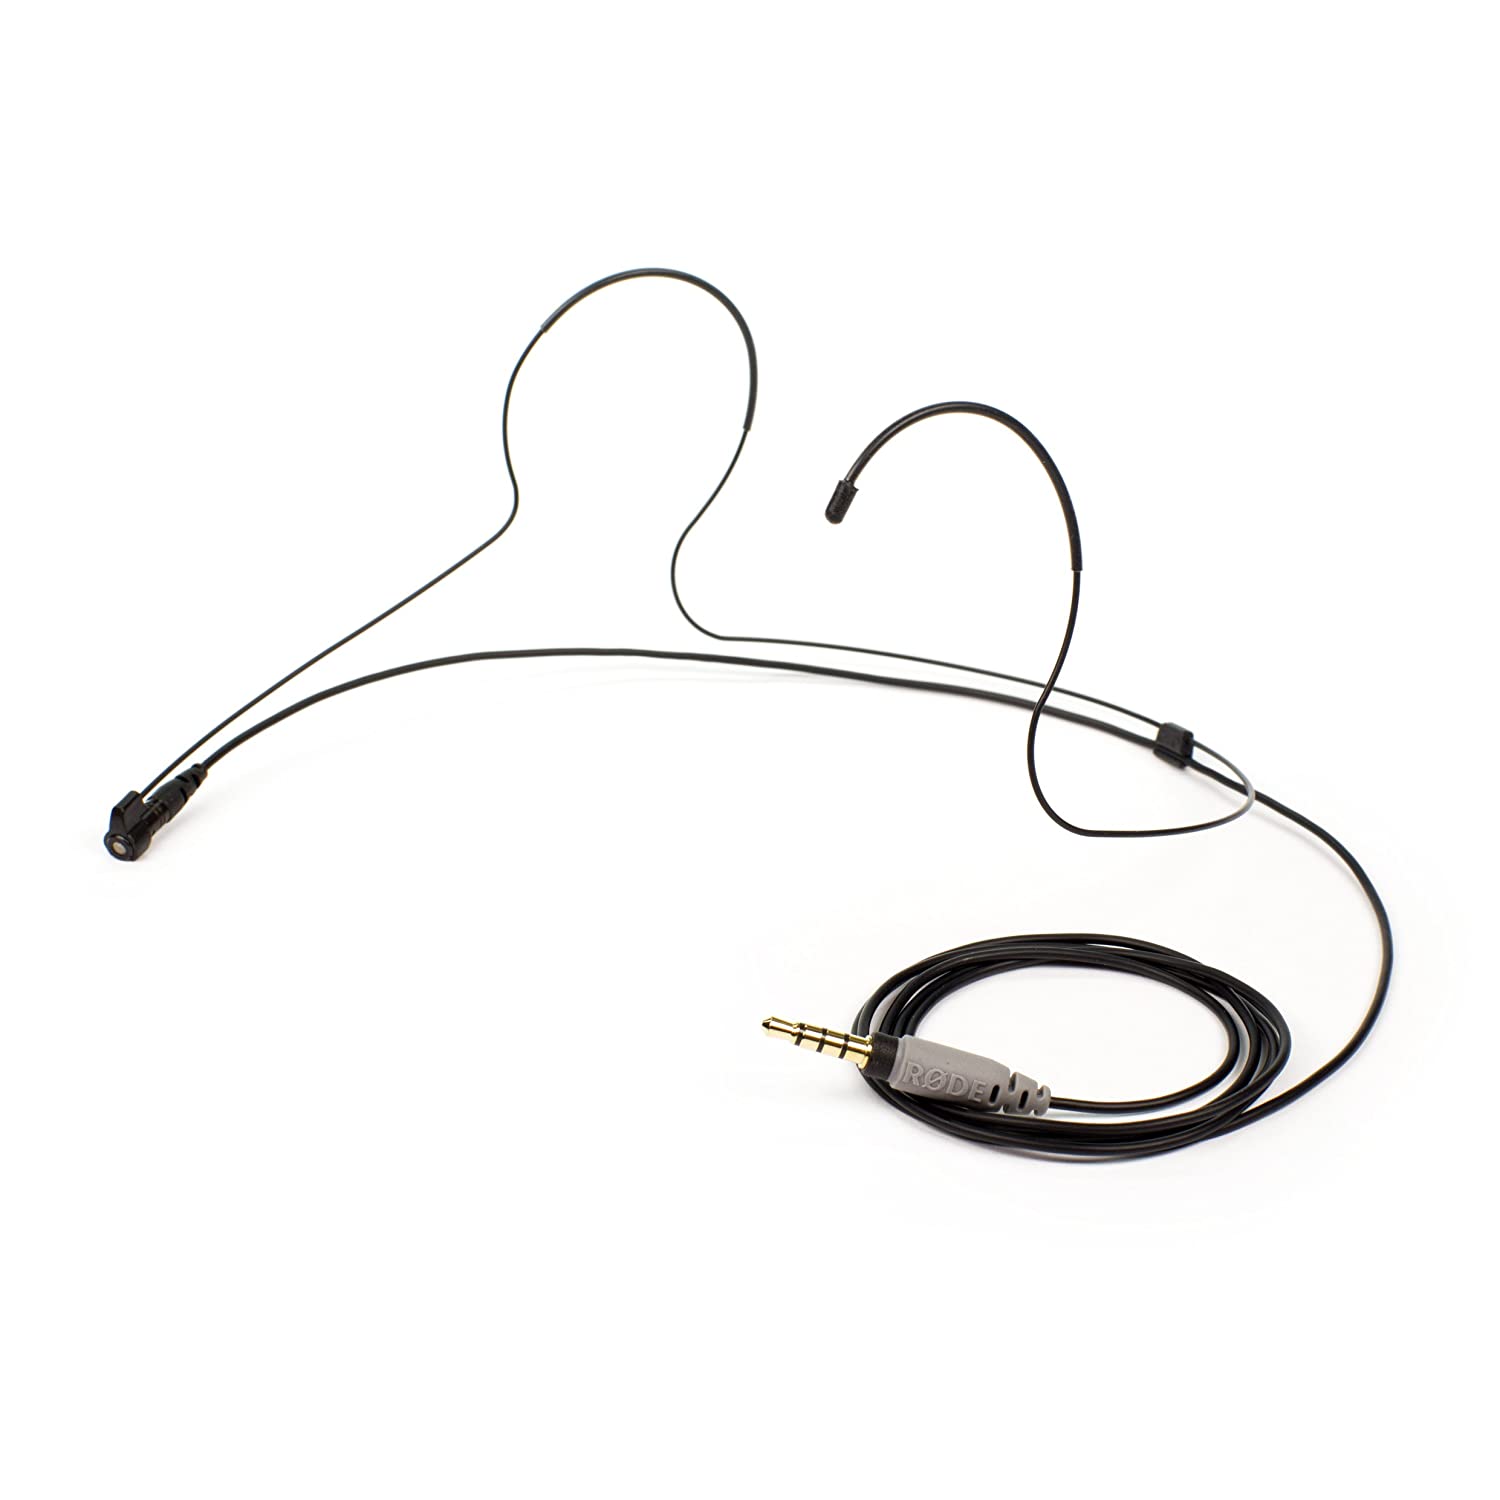 Rode Lav Headset Headset Mount For Lavalier Microphones